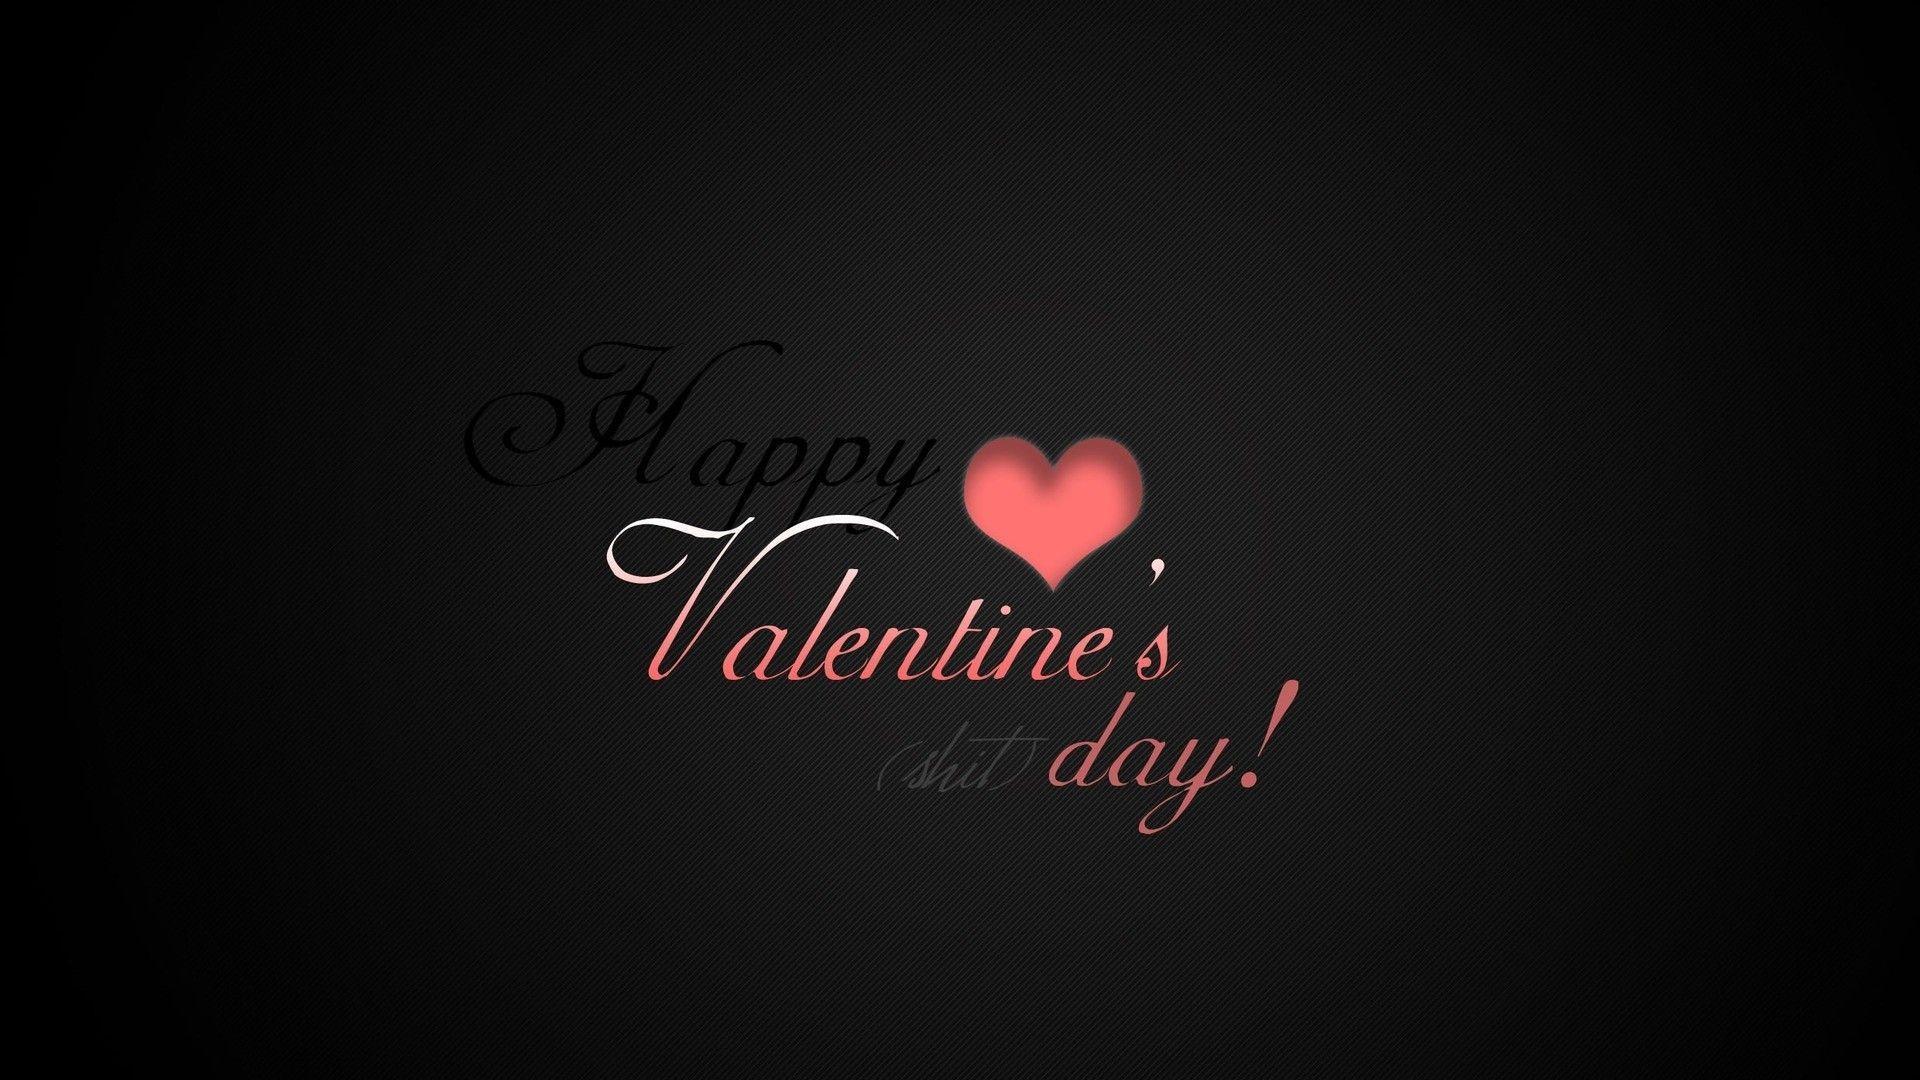 Funny Happy Valentines Day Quotes 2014 HD Wallpaper. HD